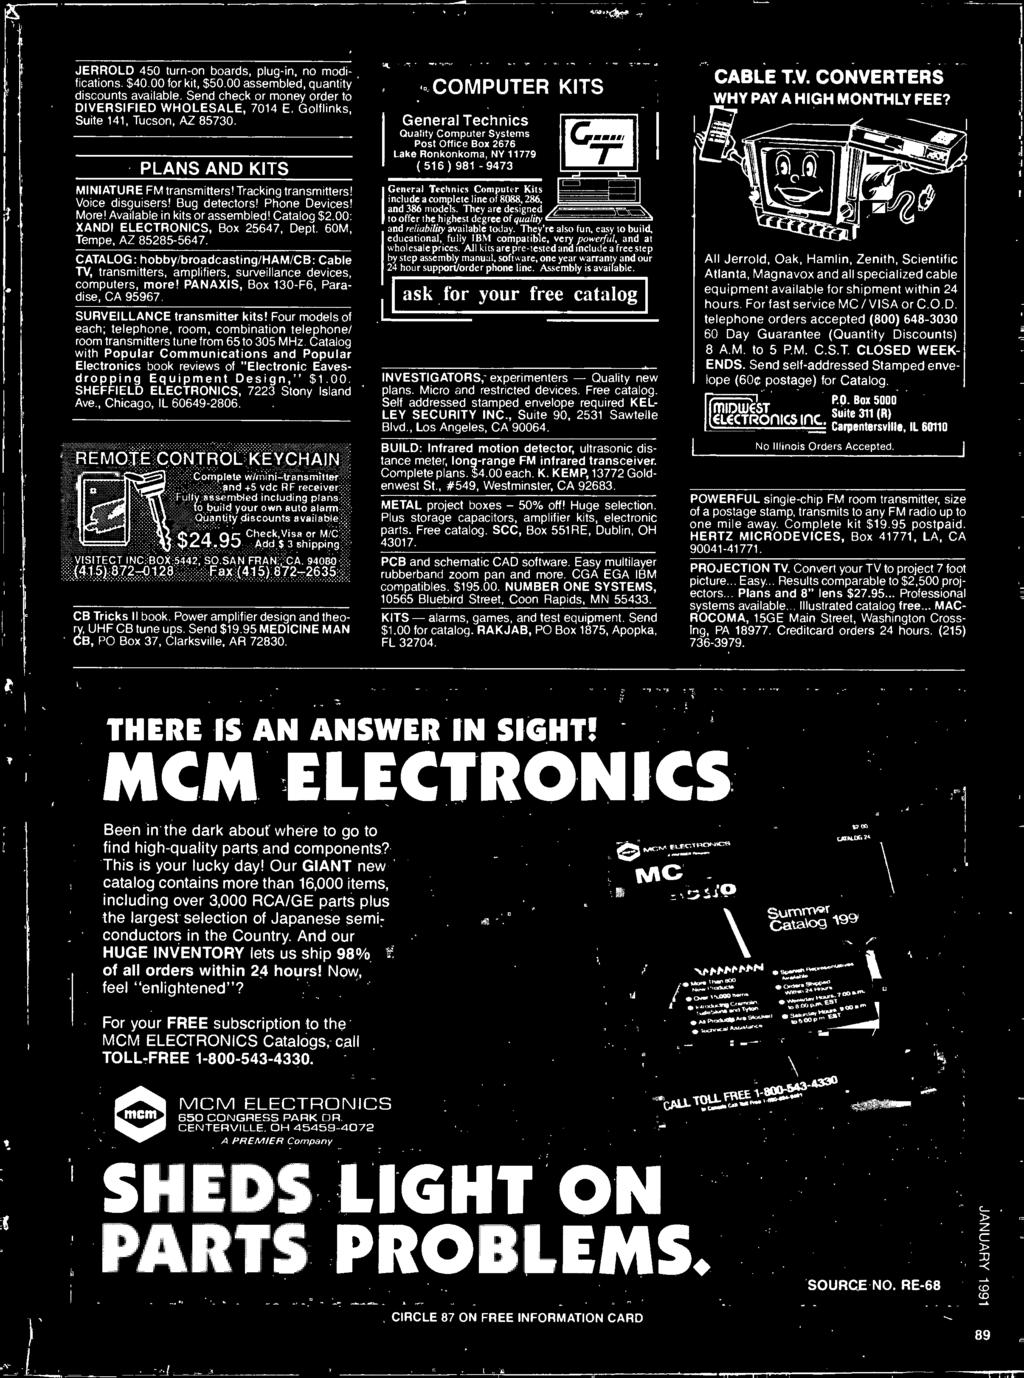 Catalog with Popular Communications and Popular Electronics book reviews of "Electronic Eavesdropping Equipment Design," $1.00. SHEFFIELD ELECTRONICS, 7223 Stony Island Ave., Chicago, IL 60649-2806.